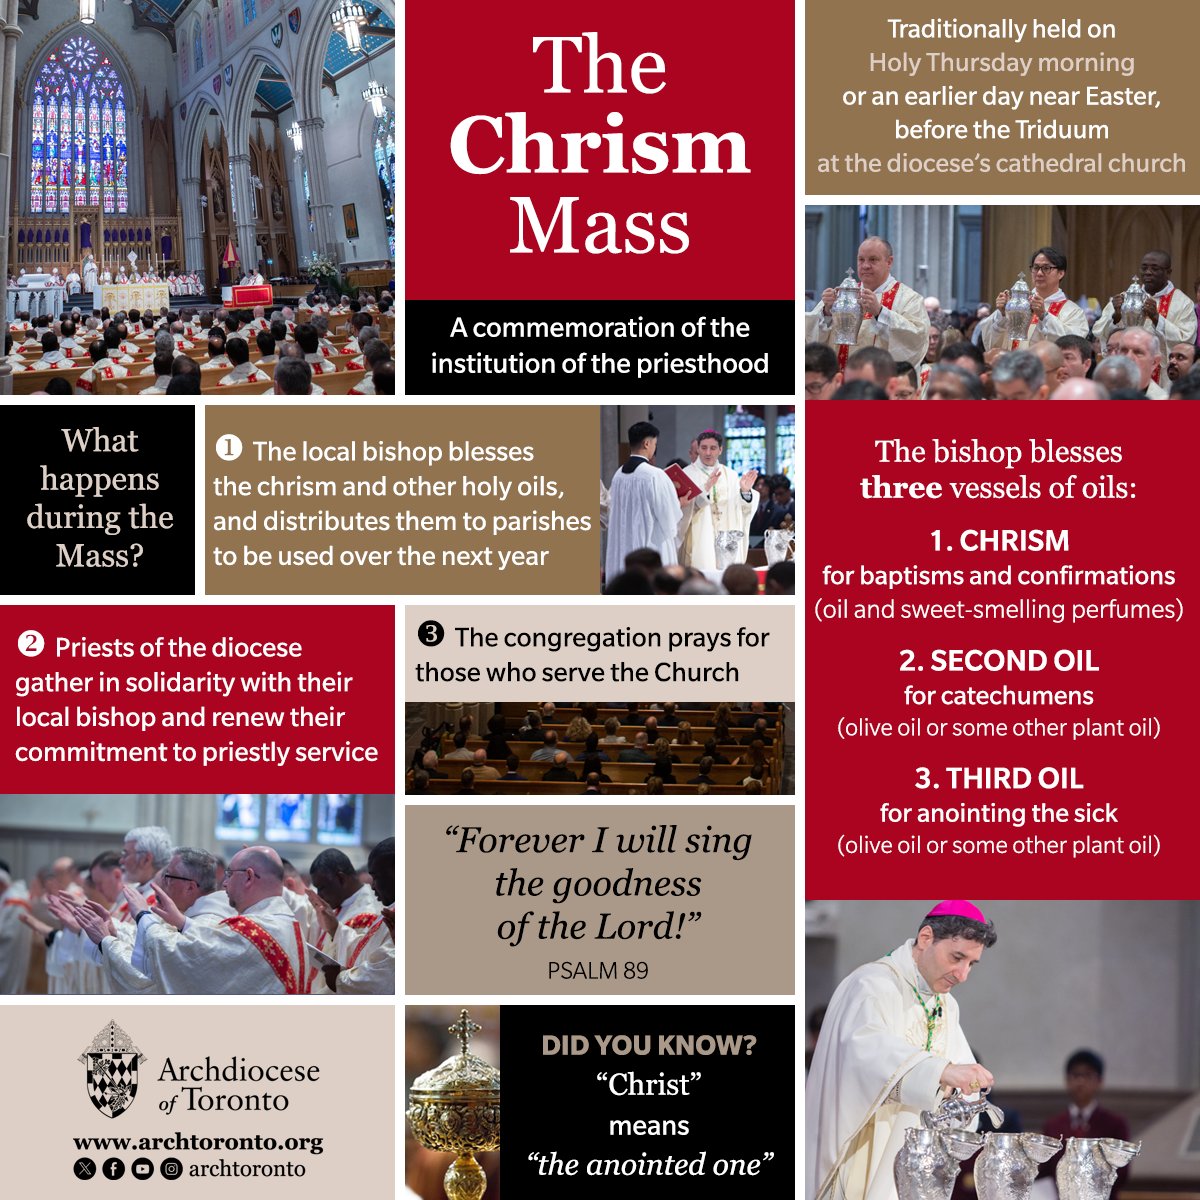 On this Tuesday of Holy Week, priests from across the Archdiocese of Toronto will gather for the Chrism Mass. #catholicTO